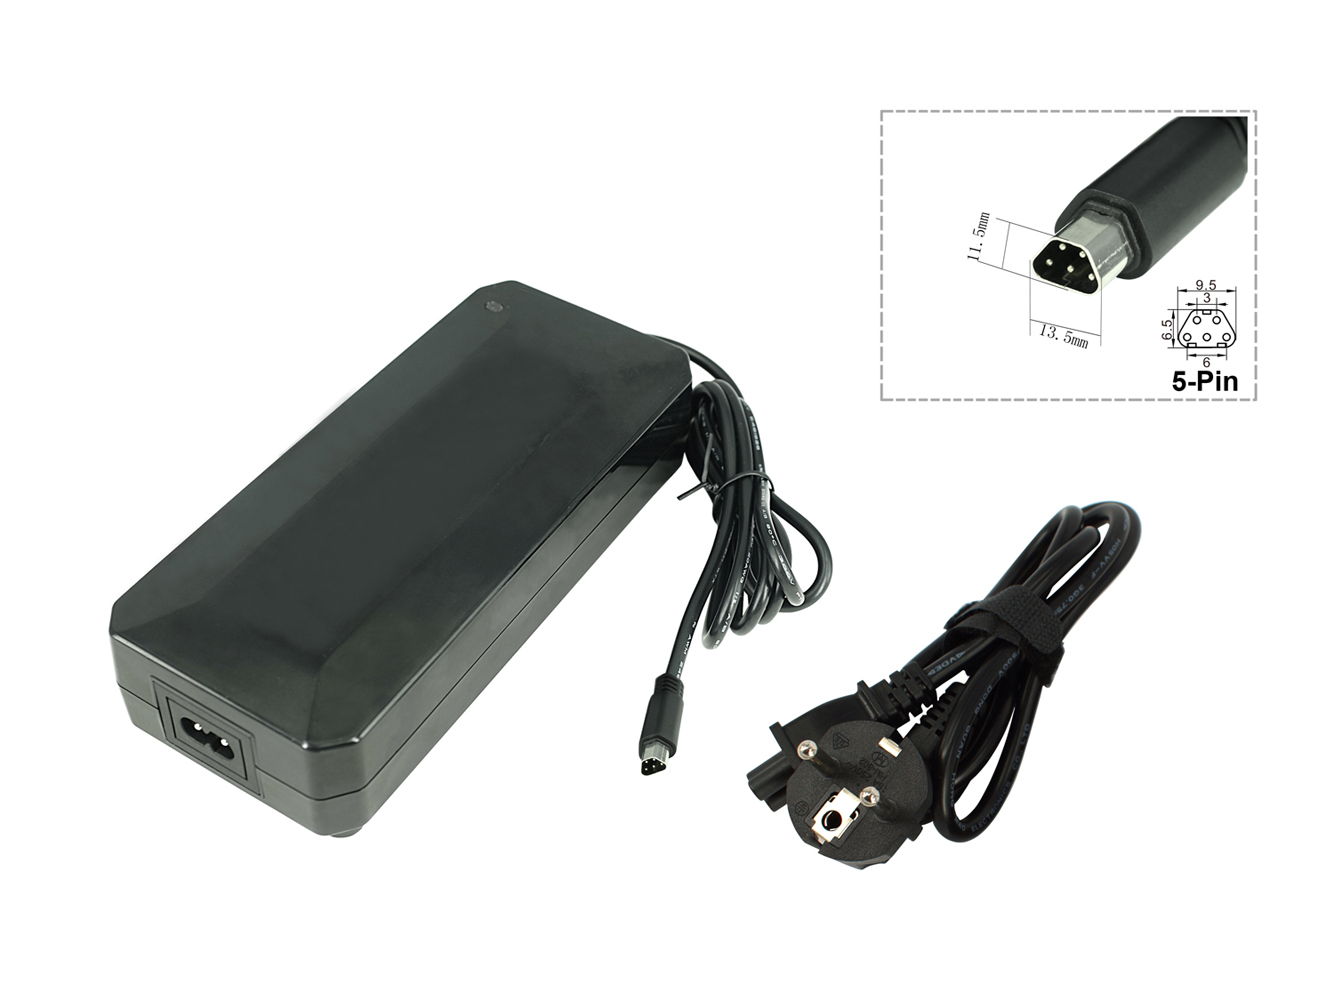 48V AC Adapter Charger For Electric Bike (Not compatible to Joycube / Phylion batteries)